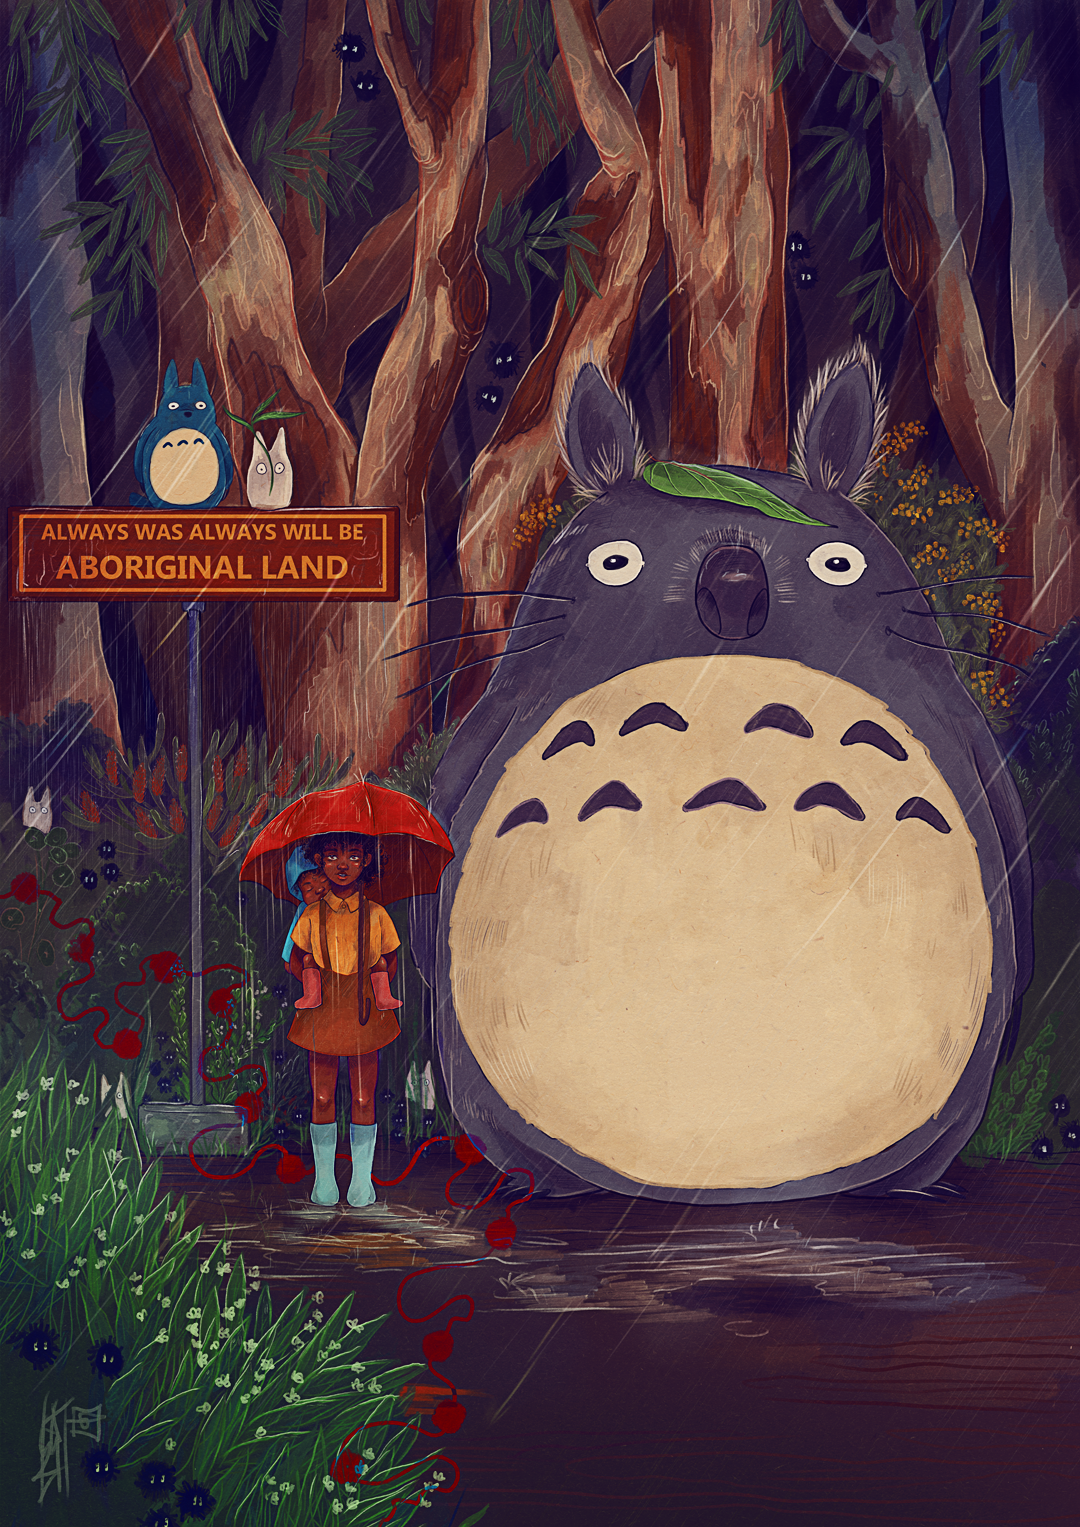 MY NEIGHBOUR TOTORO | A3 - A0 Hahnemühle German Etching Print